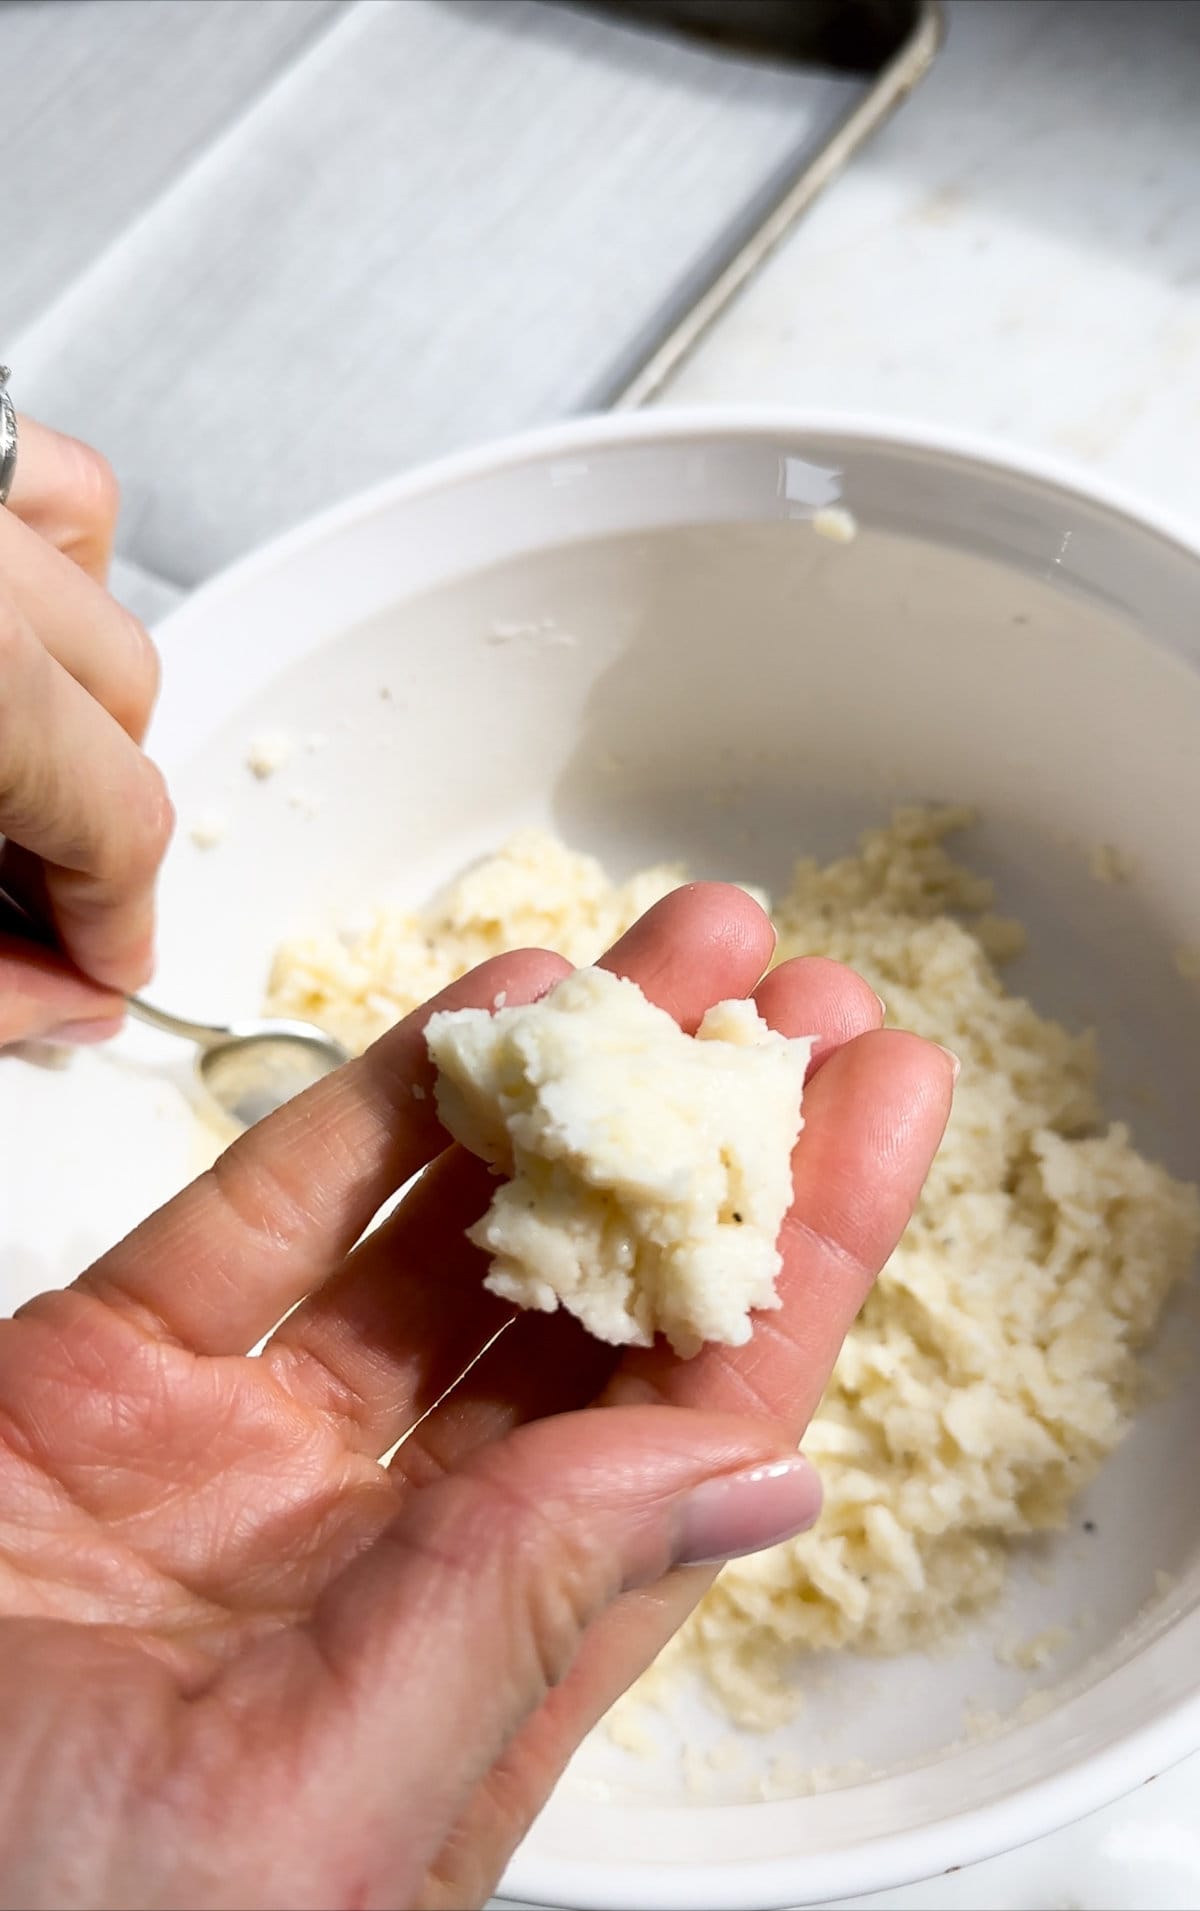 Process for making fried cheese balls- scooping up the cheese mixture with a small spoon and rolling it into a ball.